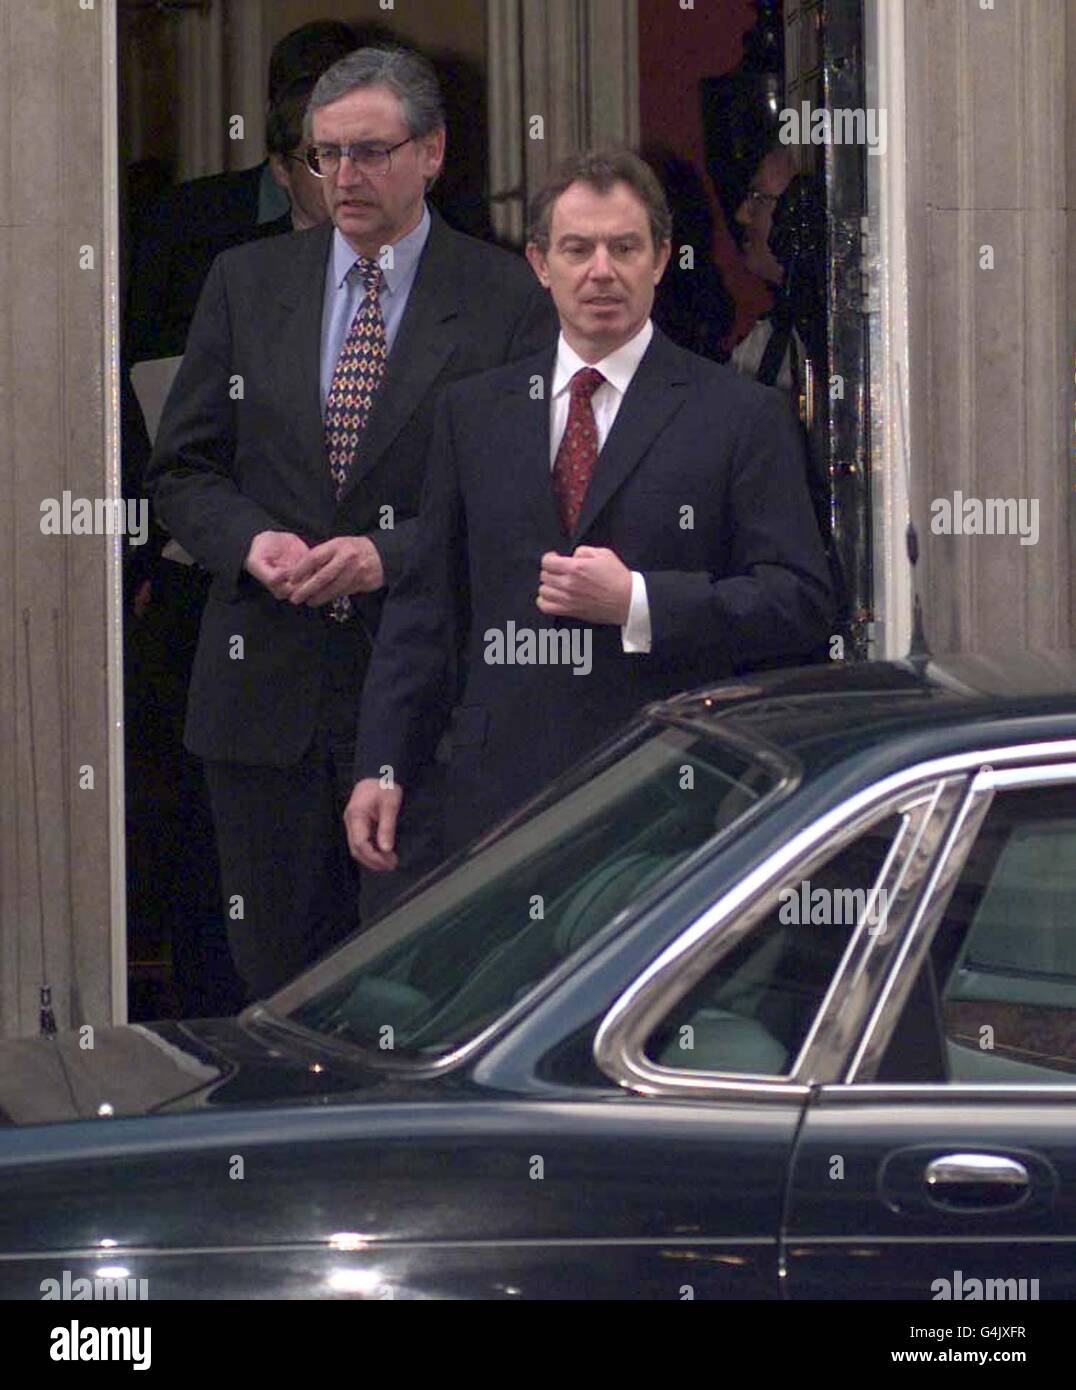 Britain's Prime Minister Tony Blair leaving 10 Downing Street in Westminster, London, en route to the House of Commons, where Chancellor of the Exchequer Gordon Brown is to deliver his third Budget. Stock Photo